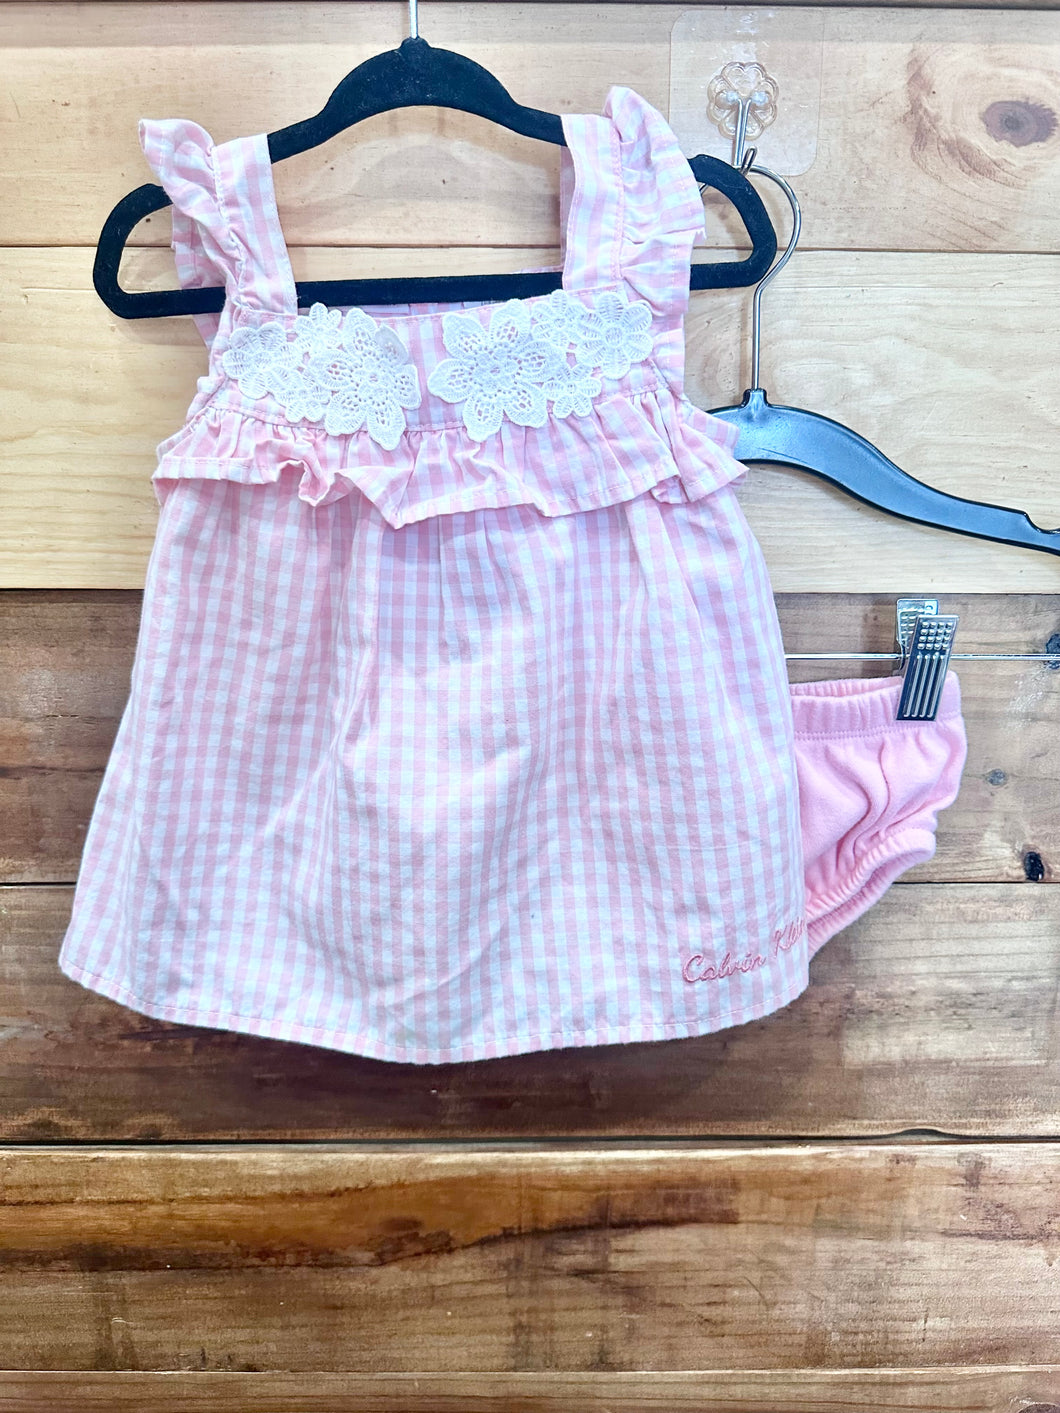 Calvin Klein Pink Gingham Dress w/Bloomers Size 12m